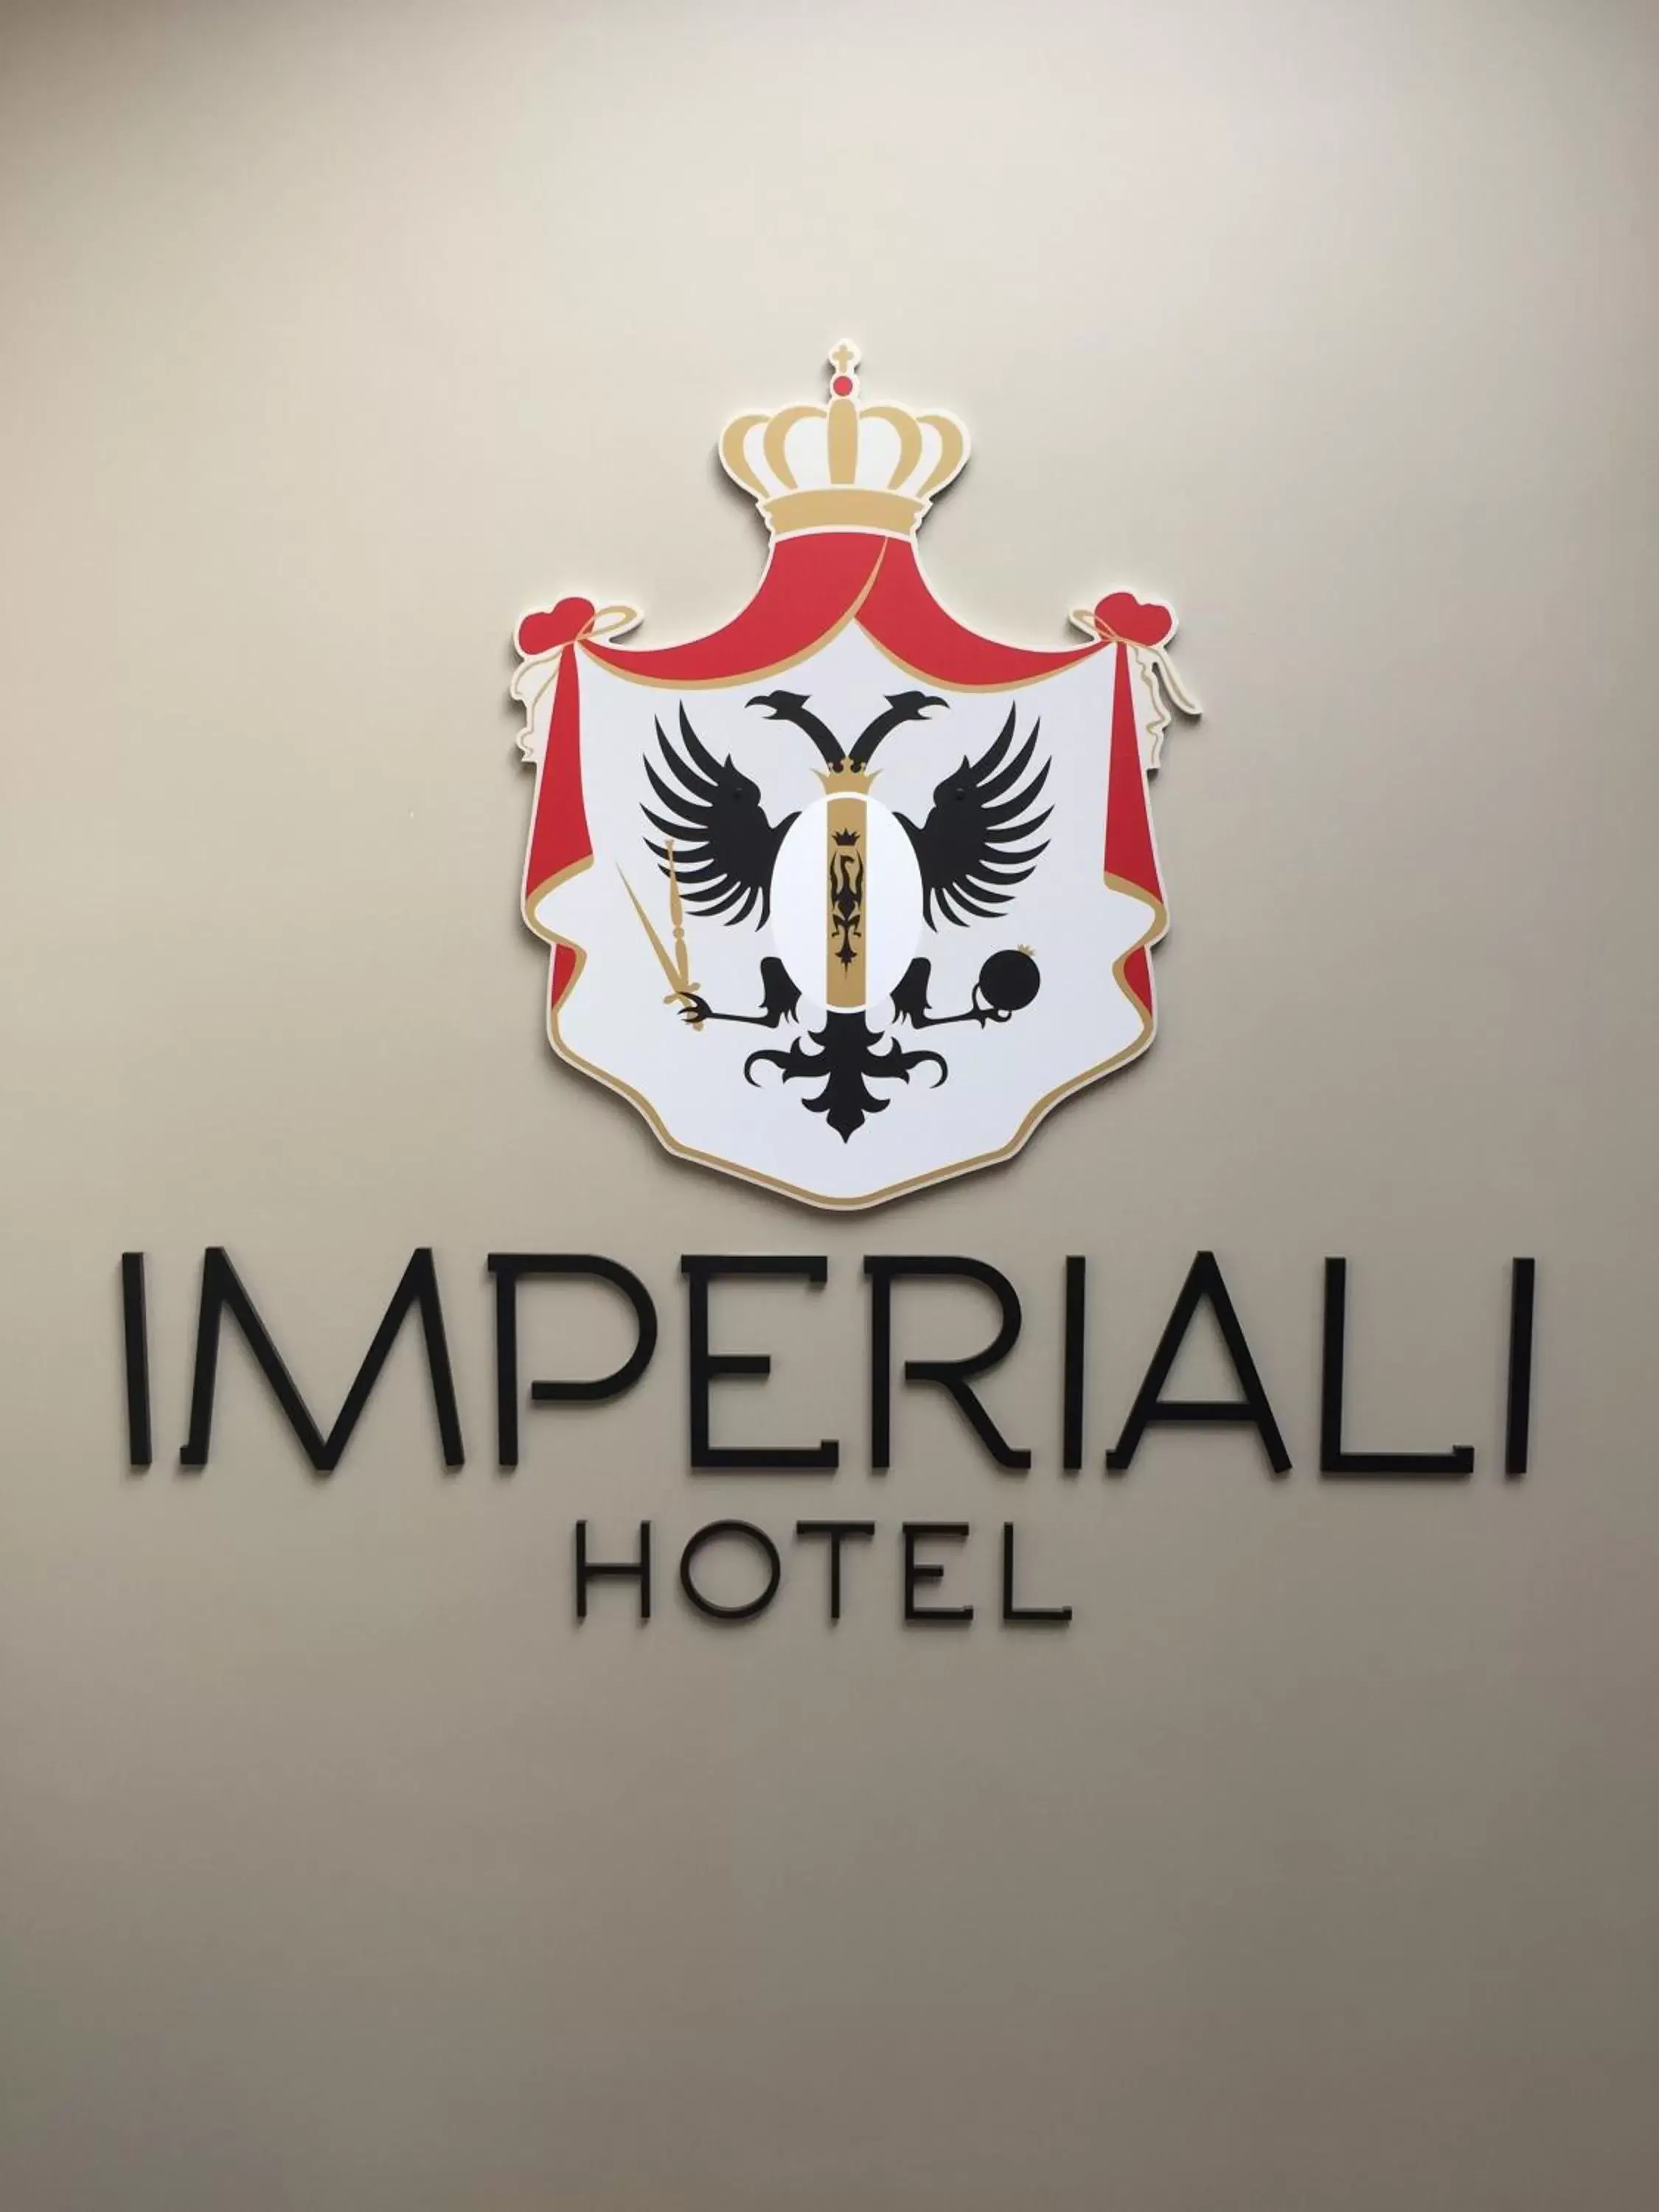 Property logo or sign in Imperiali Hotel